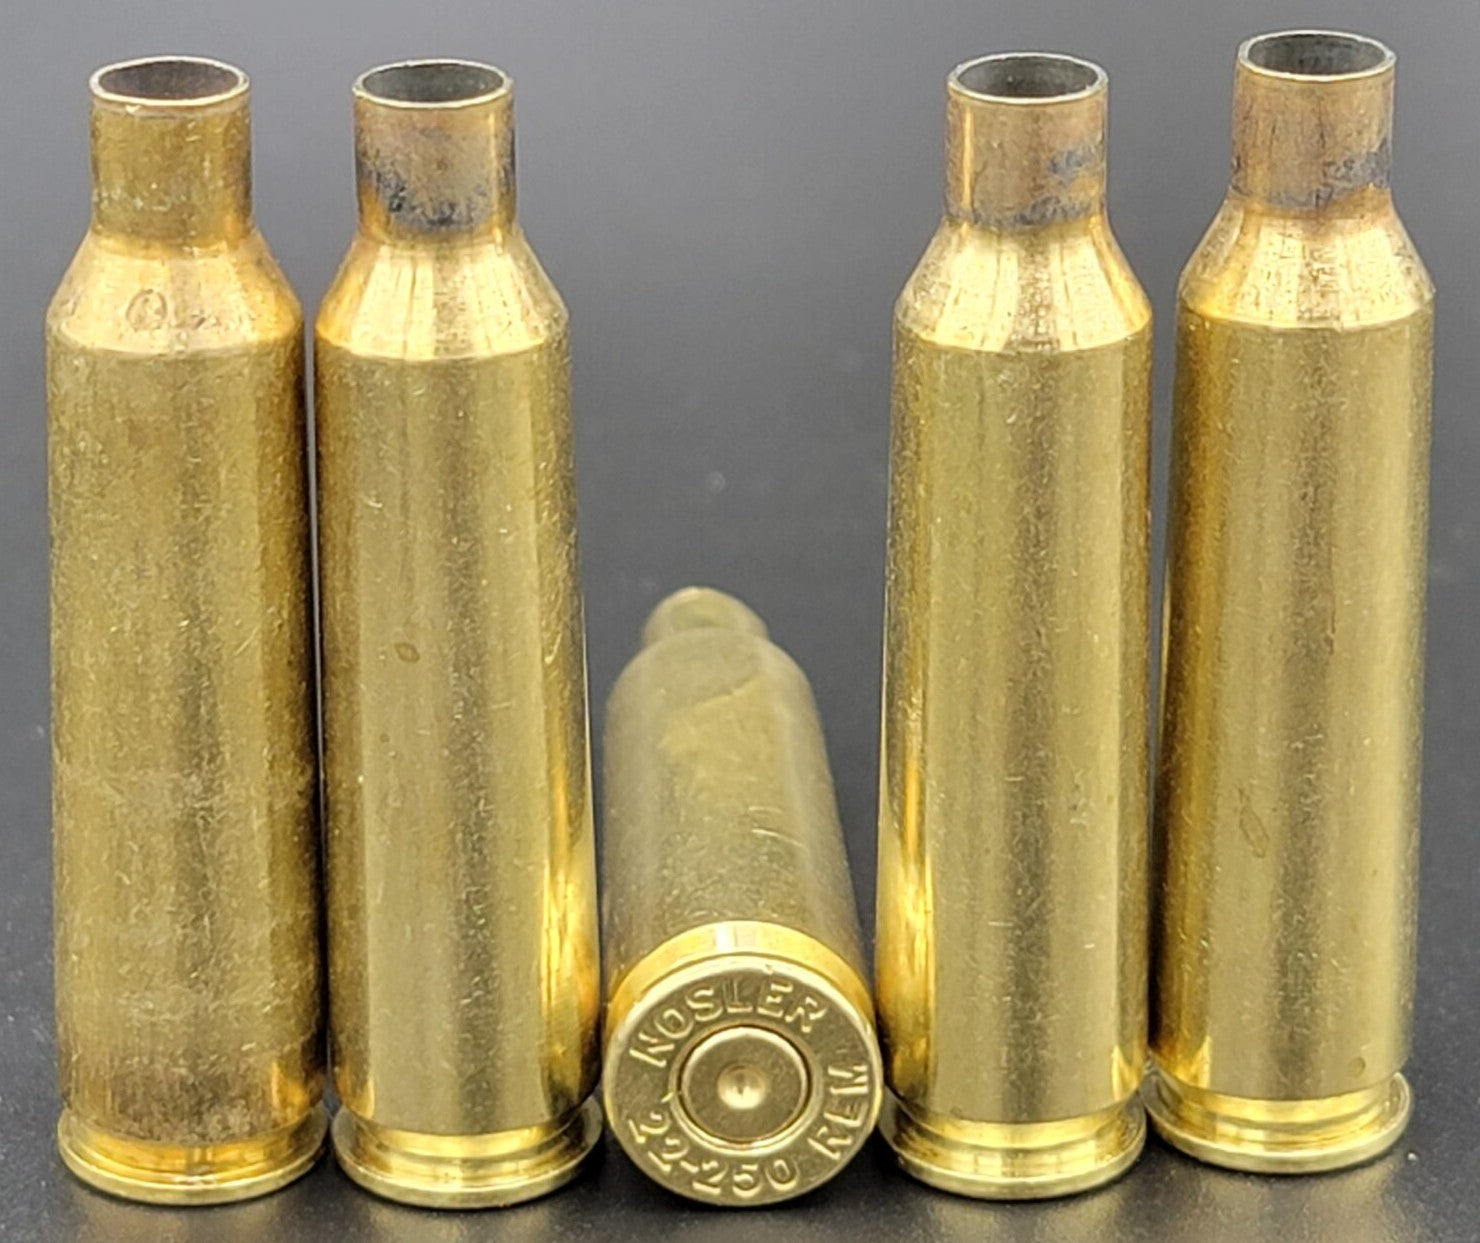 22-250 Rem once fired rifle brass. Hand sorted from reputable indoor/military ranges for reloading. Reliable spent casings for precision shooting.